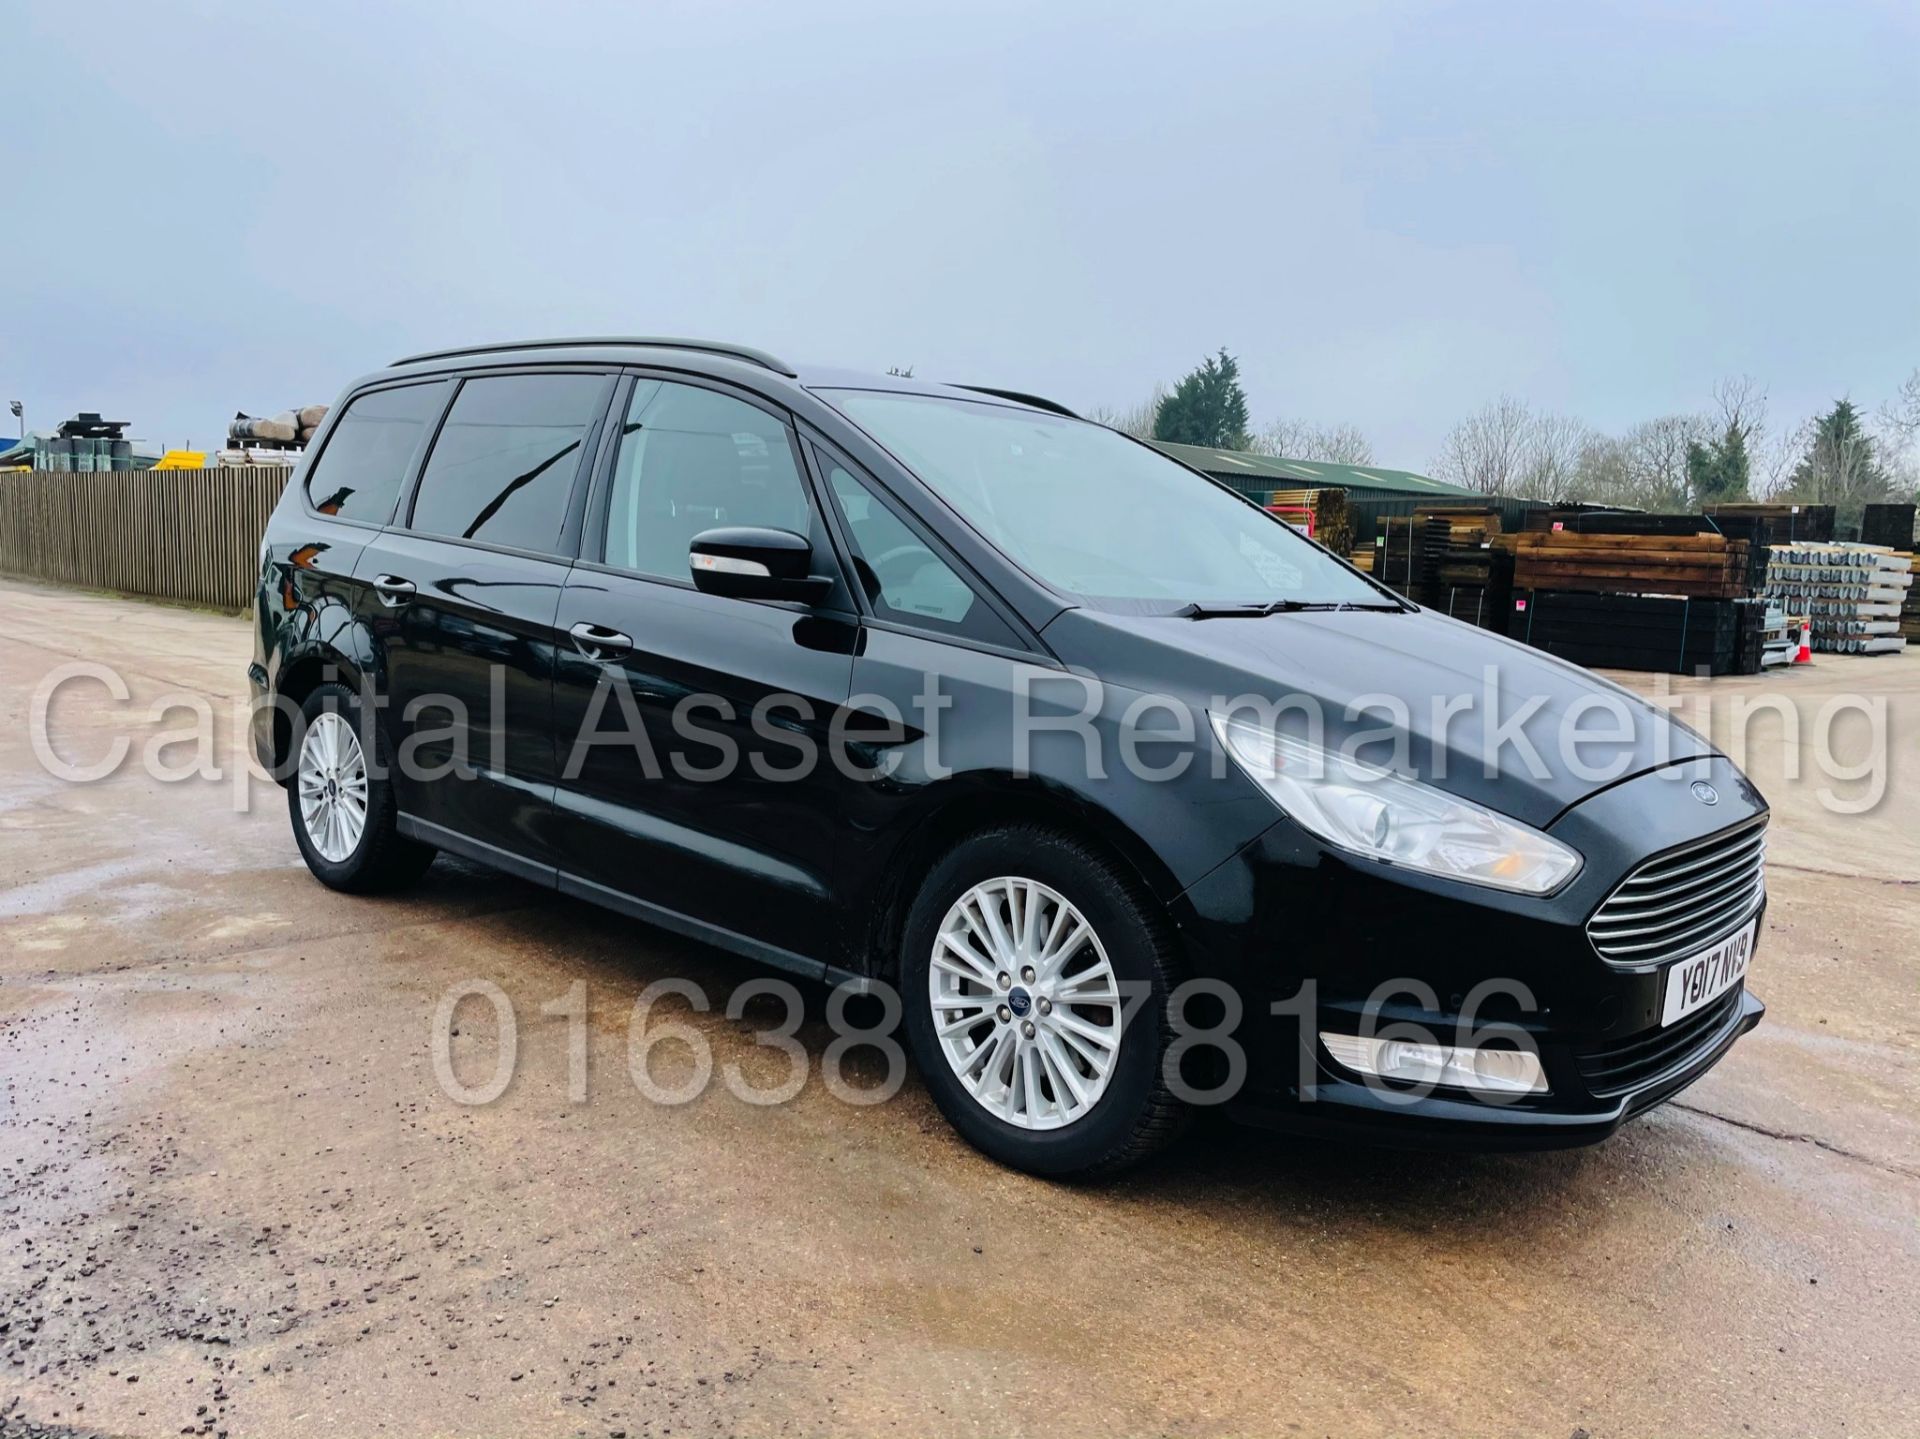 FORD GALAXY *ZETEC EDITION* 7 SEATER MPV (2017 - EURO 6) '2.0 TDCI - AUTO' (1 OWNER FROM NEW)